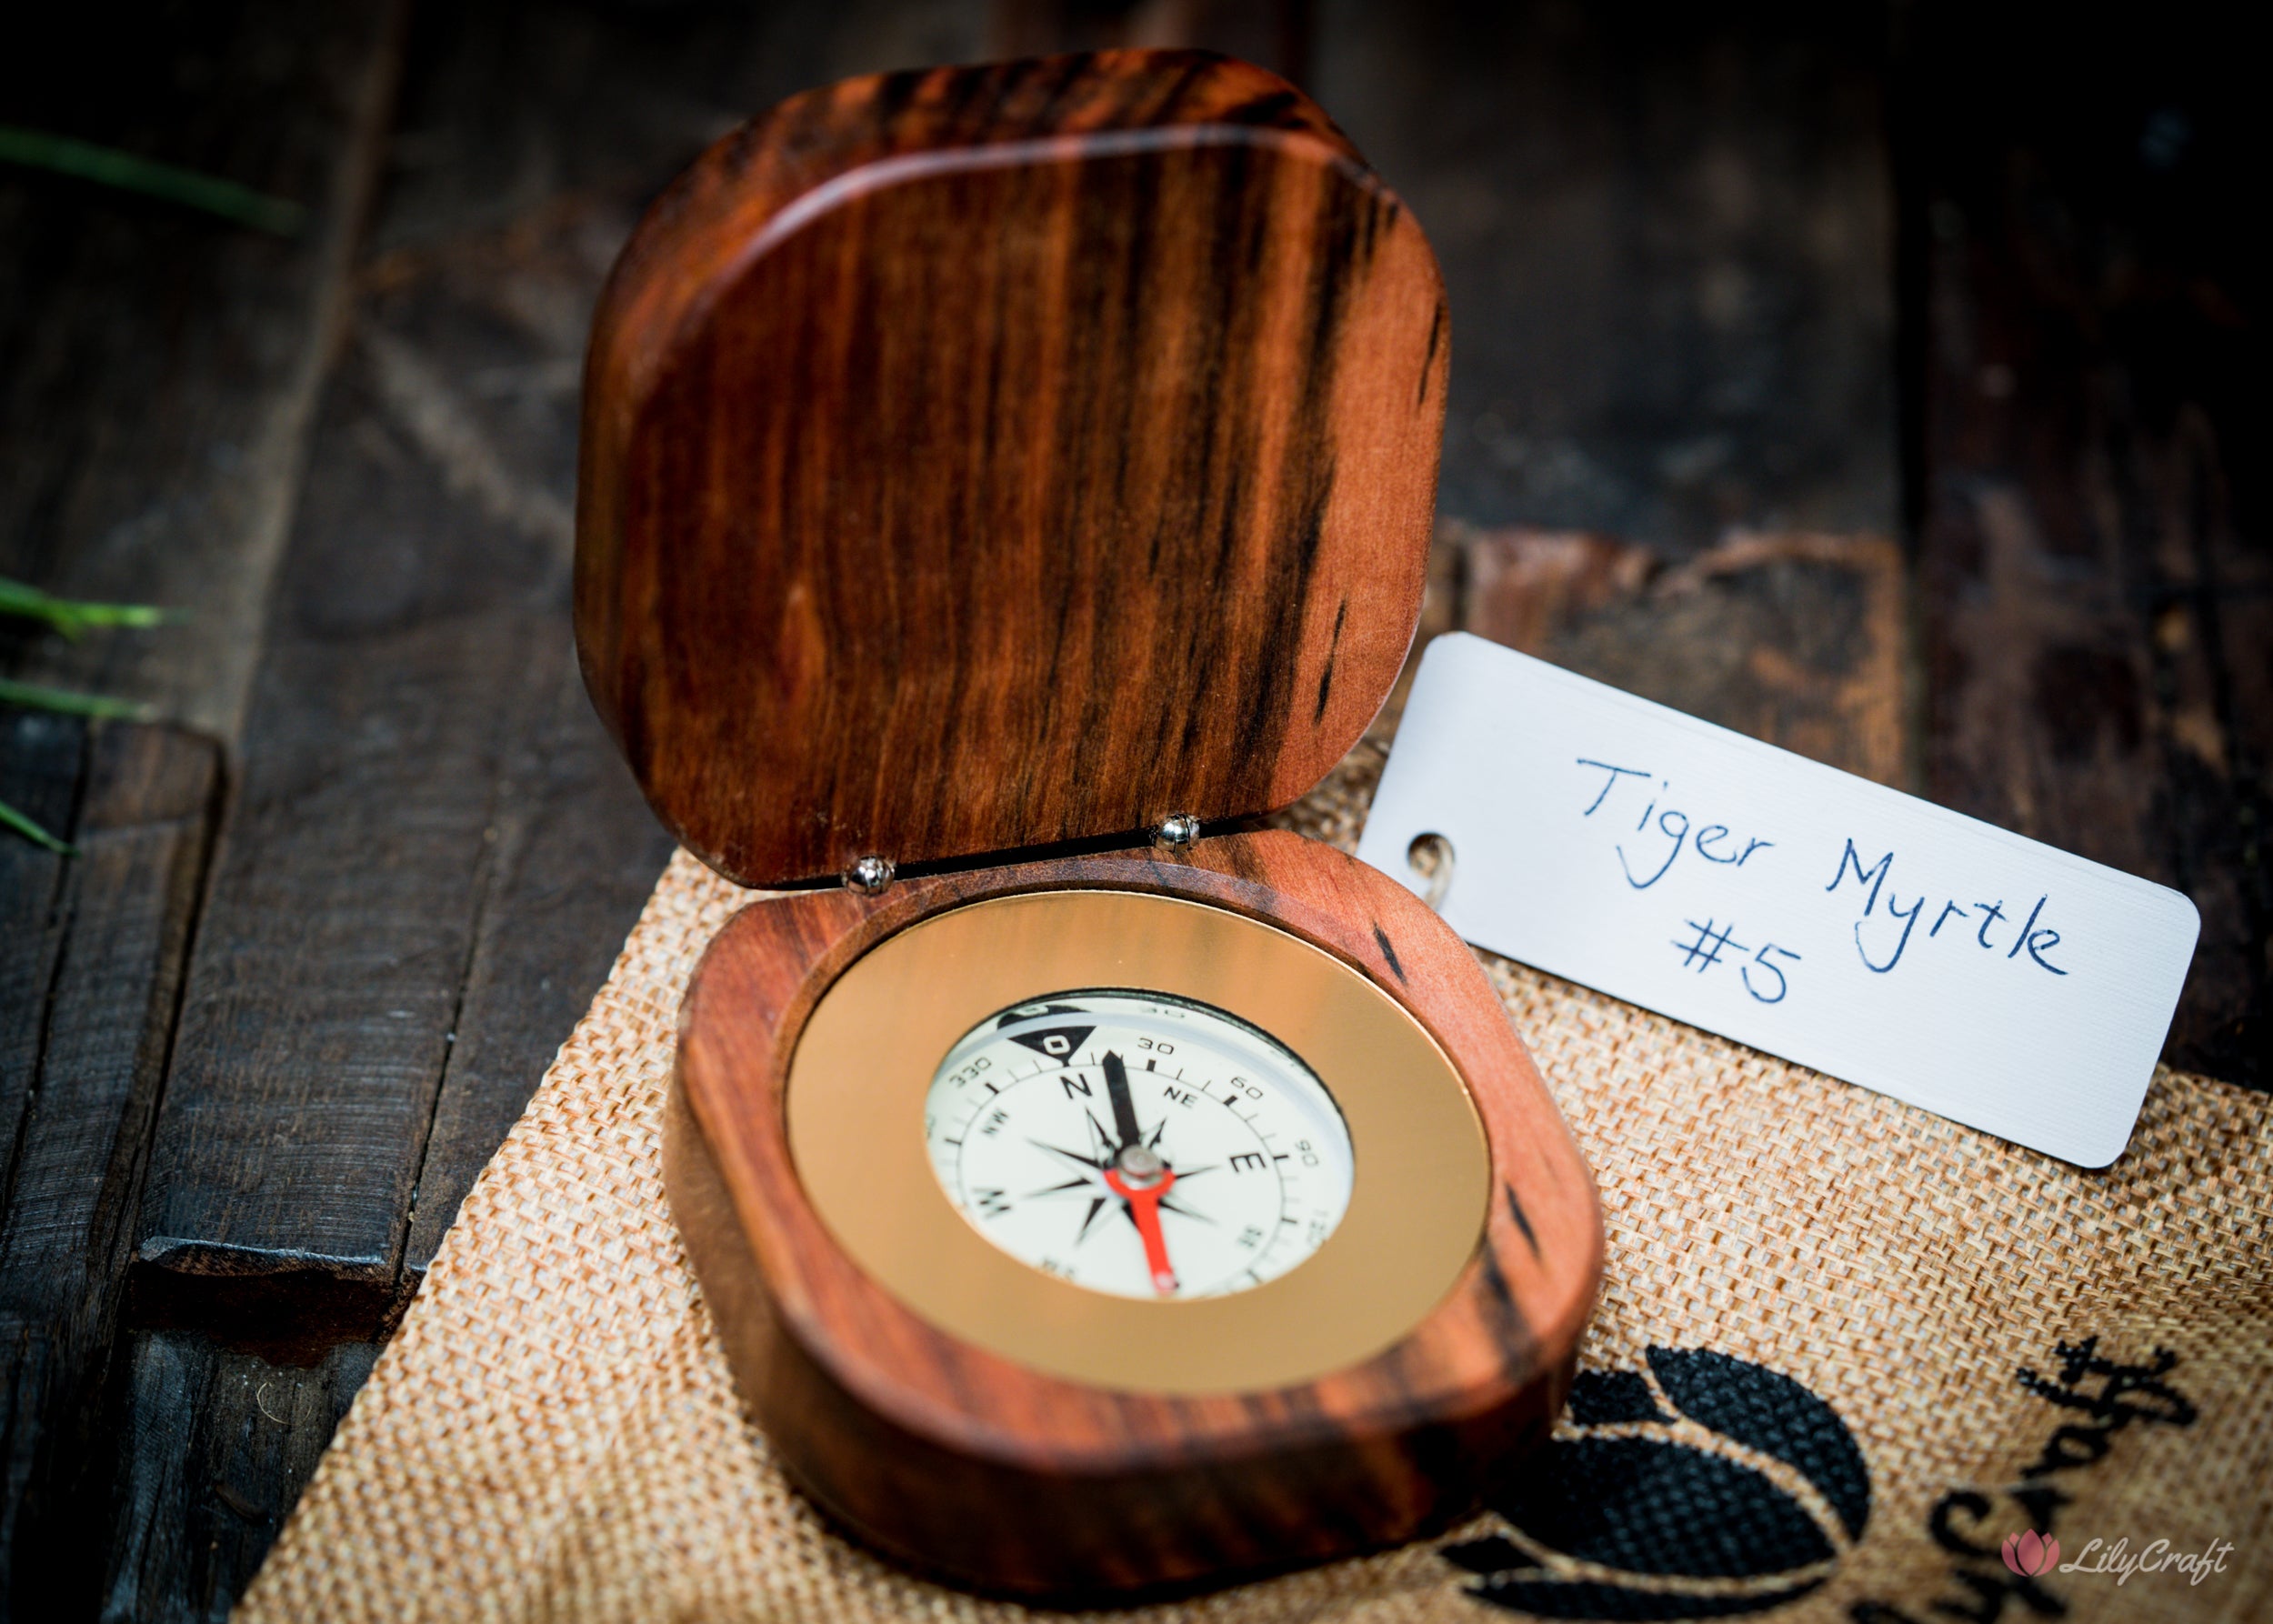 Engraved wooden compass in a rustic presentation.